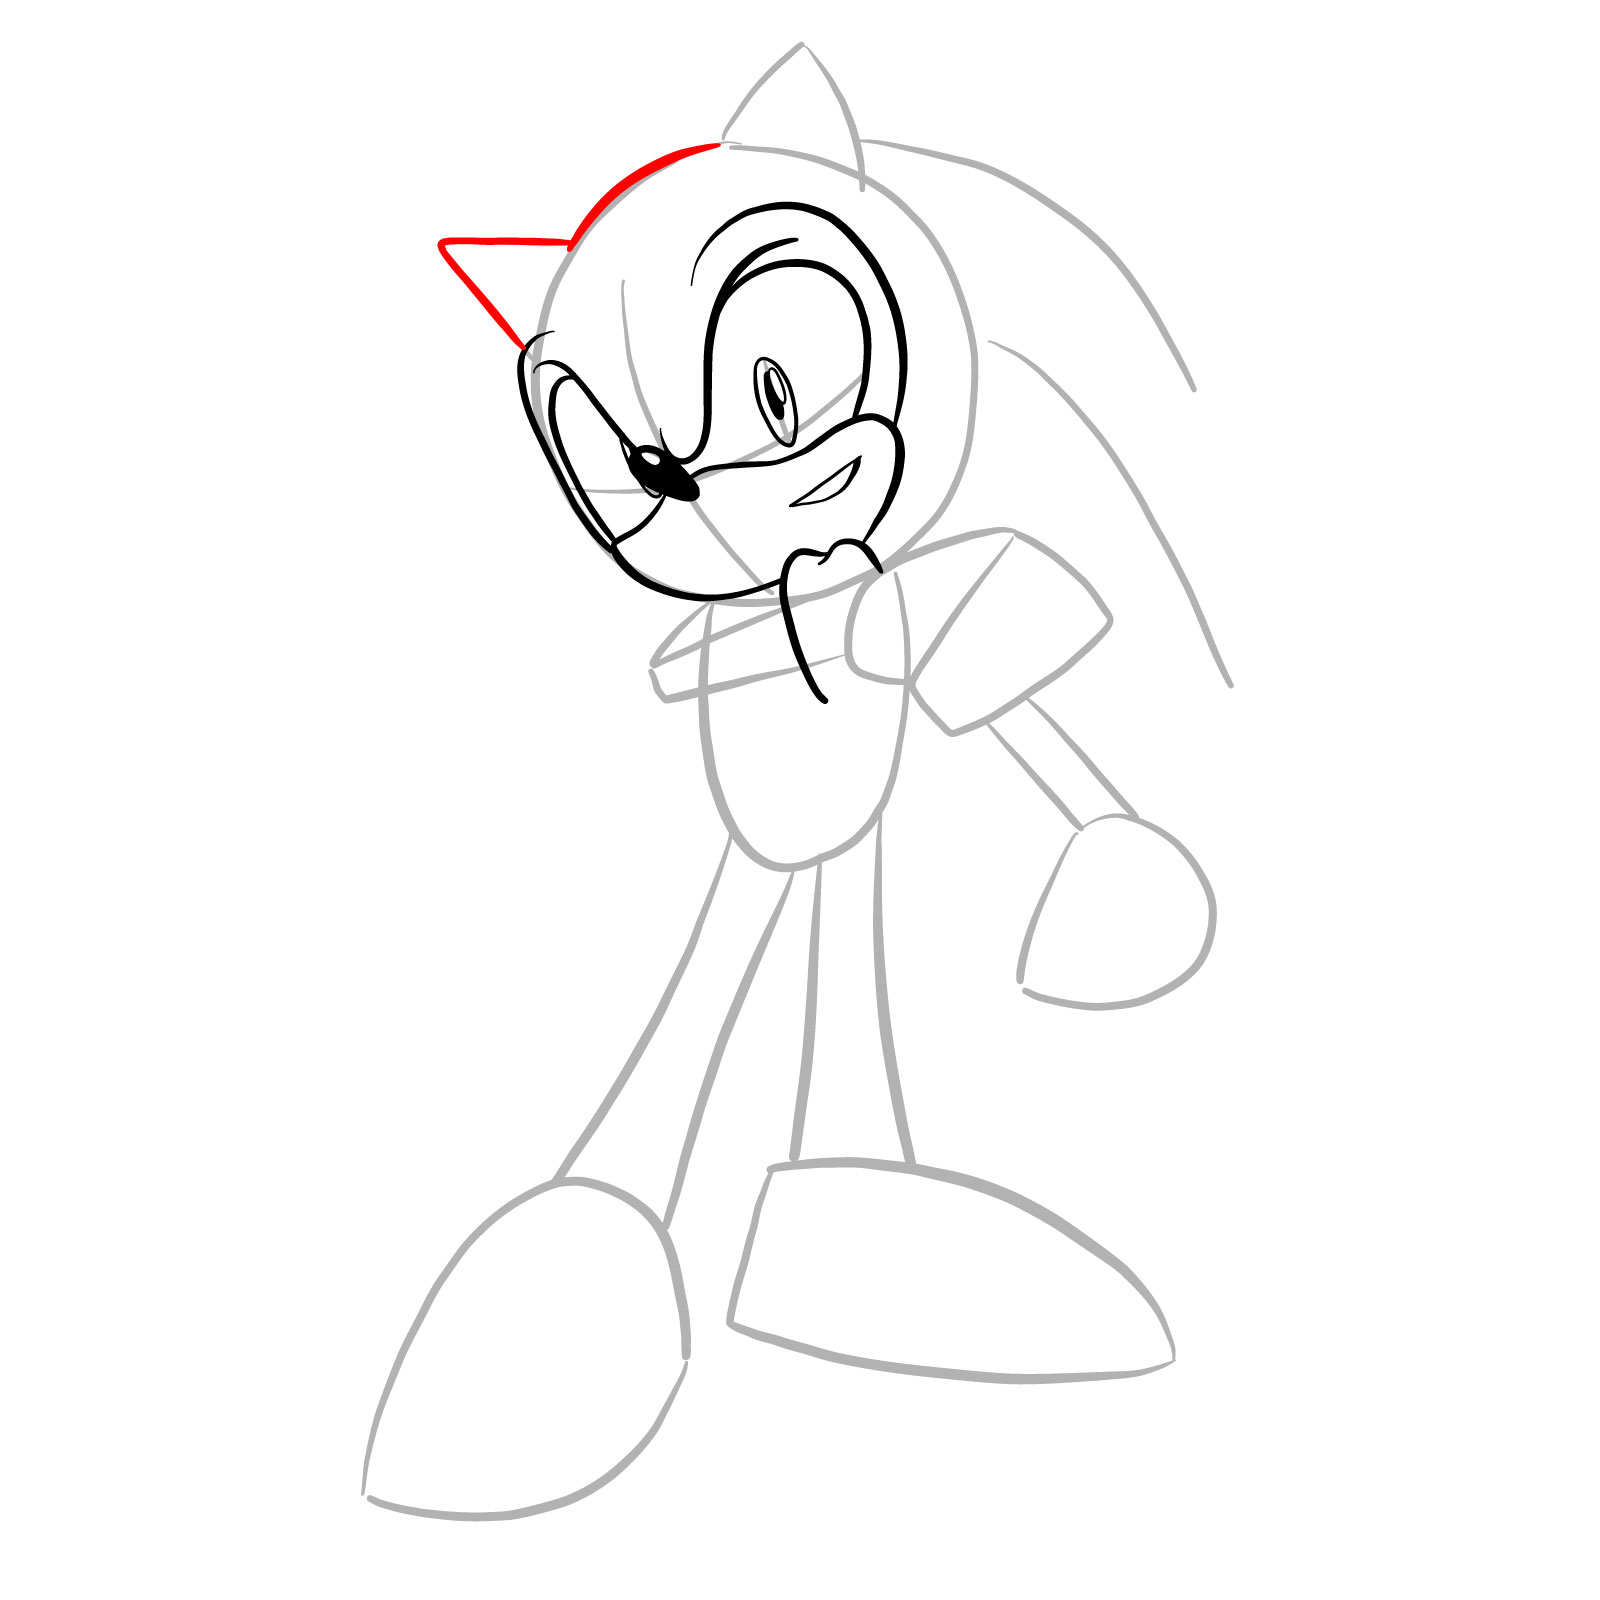 How to draw Coldsteel the Hedgehog - step 11